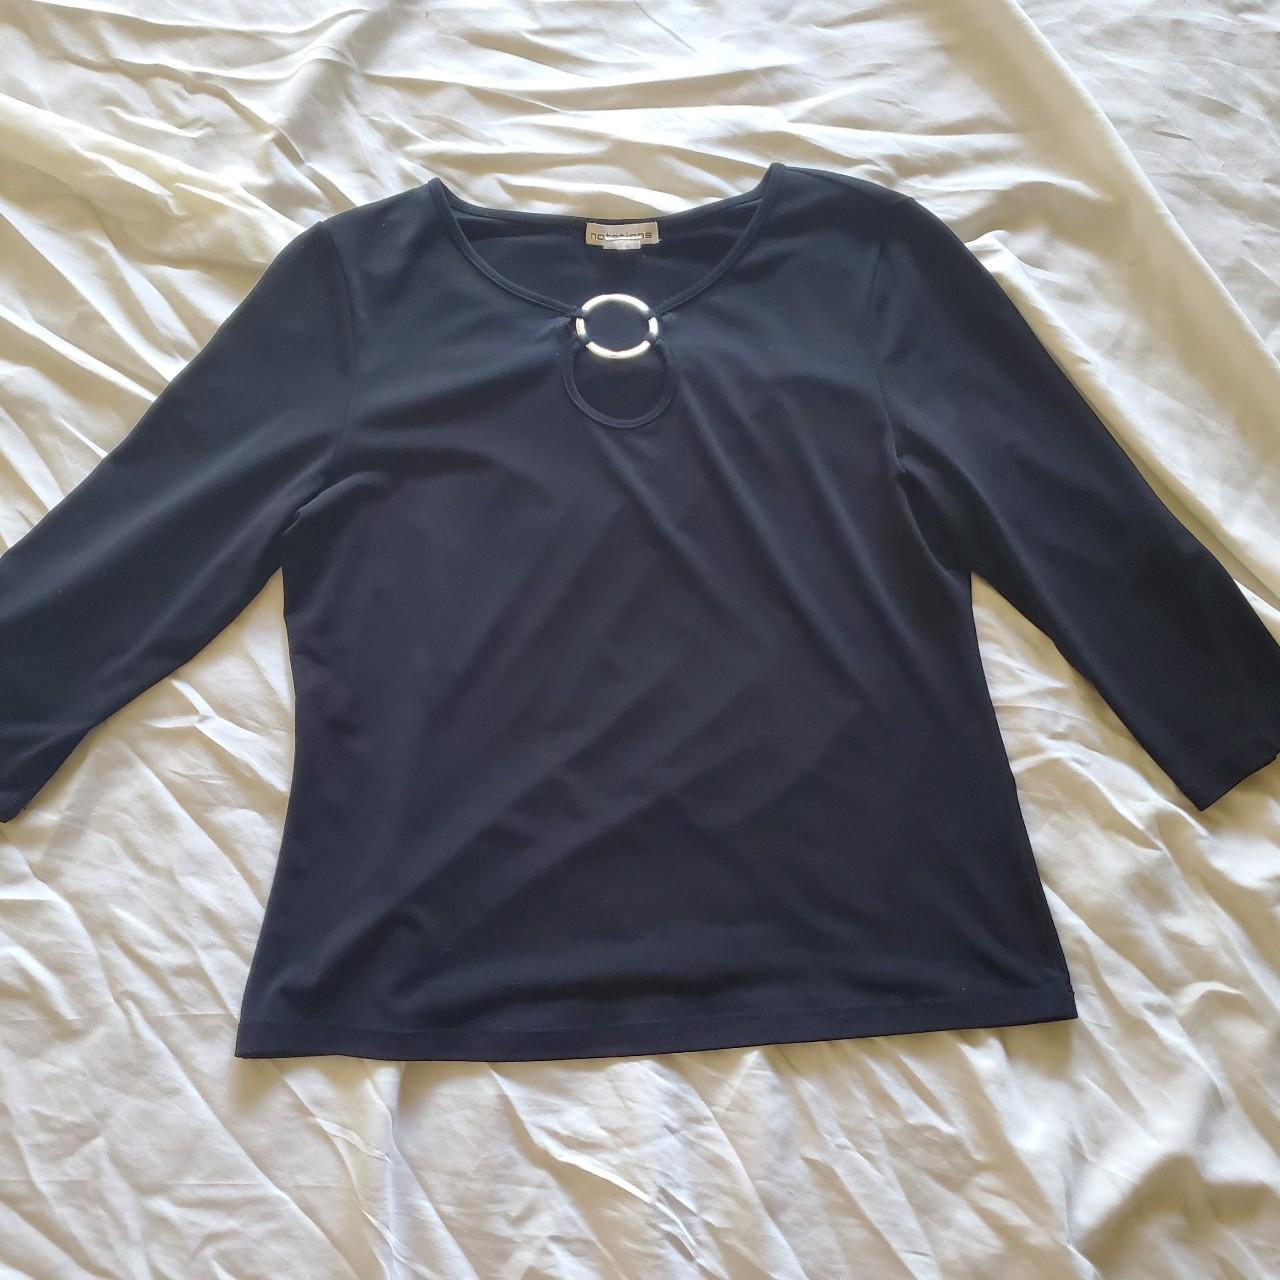 Early 2000s black quarter sleeve shirt with silver... - Depop